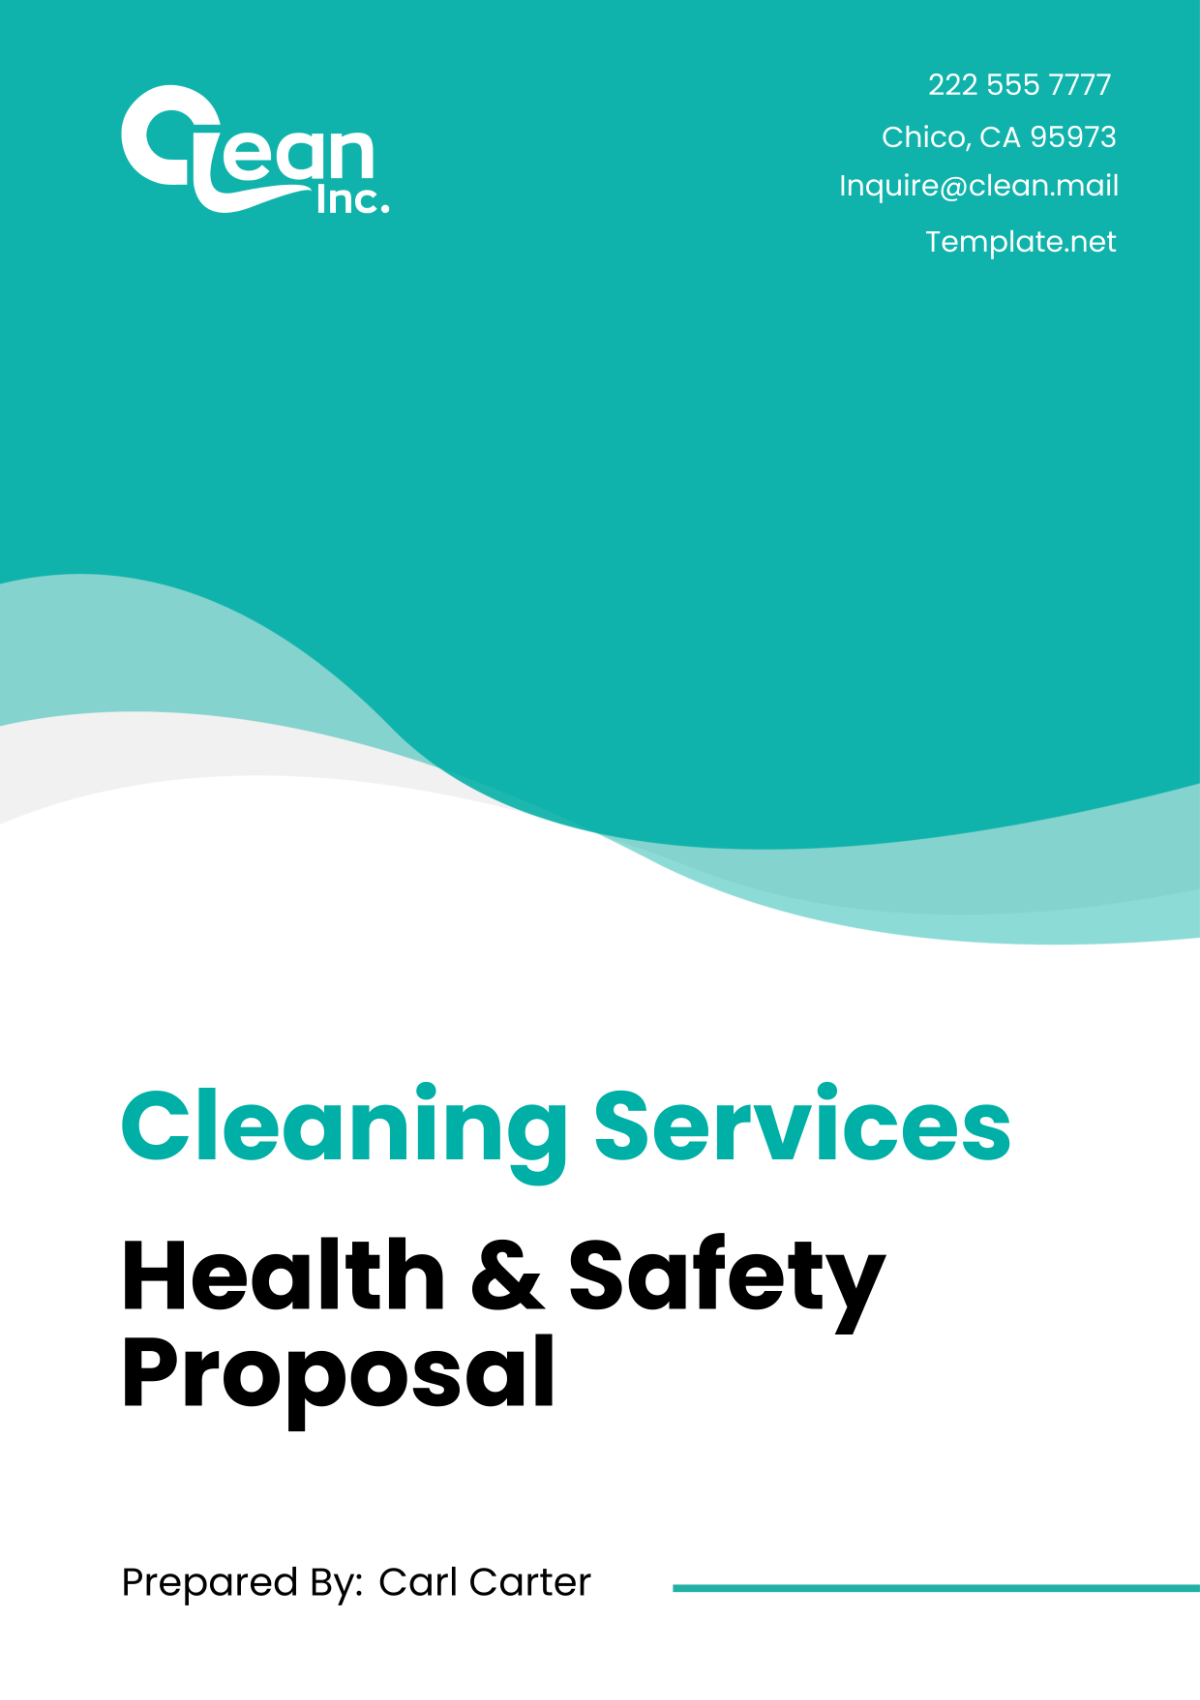 Free Cleaning Services Health & Safety Proposal Template